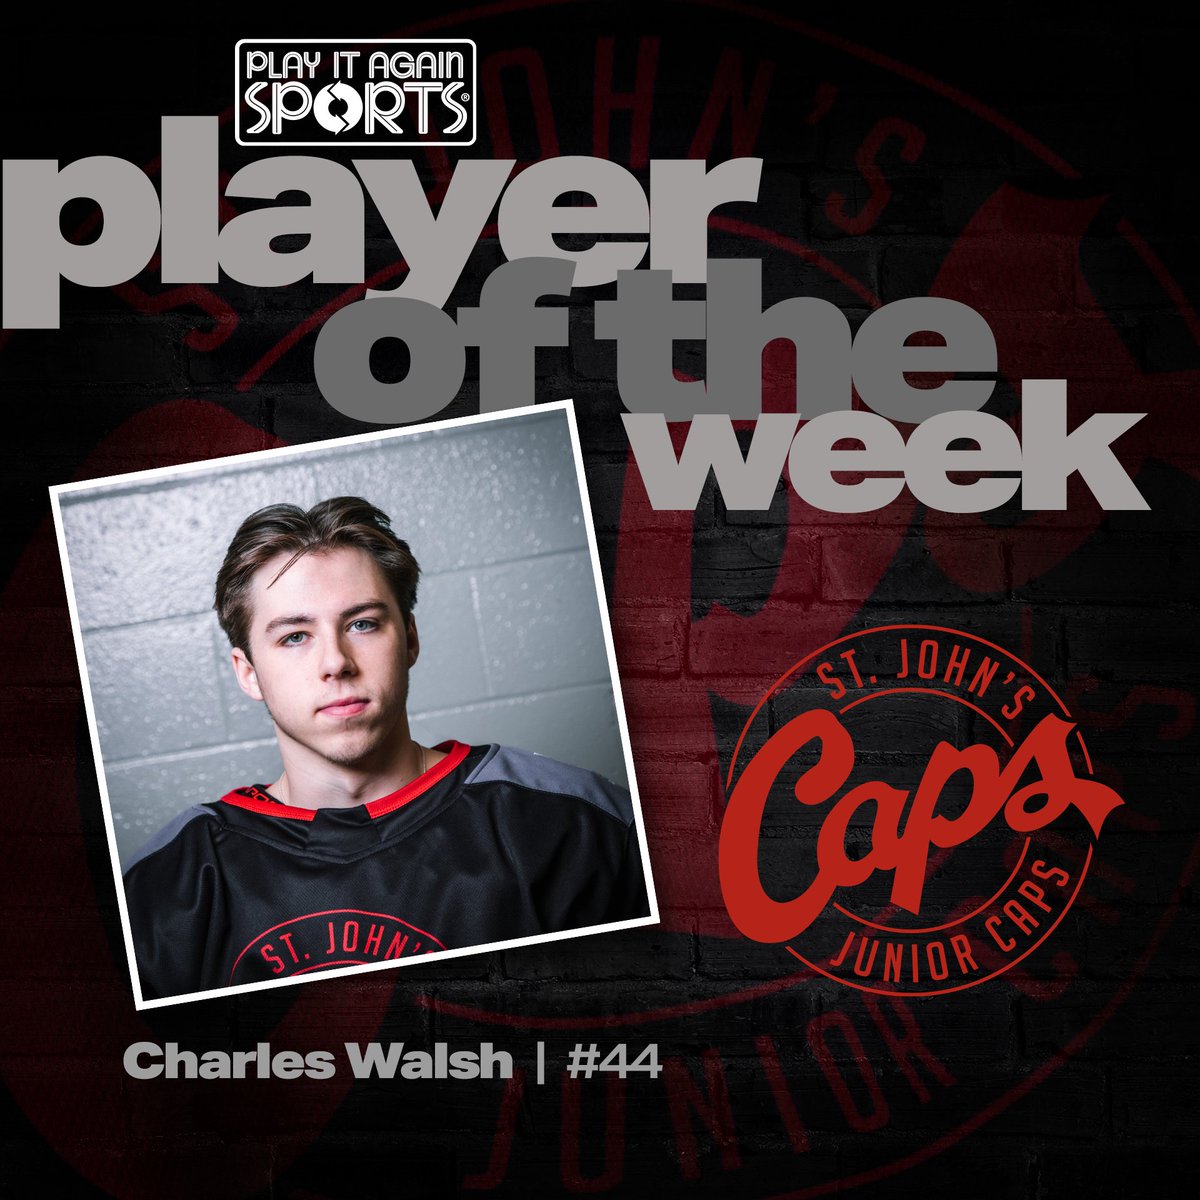 Meet our Play It Again Sports Junior Caps Player of the Week, Charles Walsh! With a goal and an assist in our last game, combined with his strong defensive play, Charles played a key role in our success this week. Congrats, Charles! #playeroftheweek